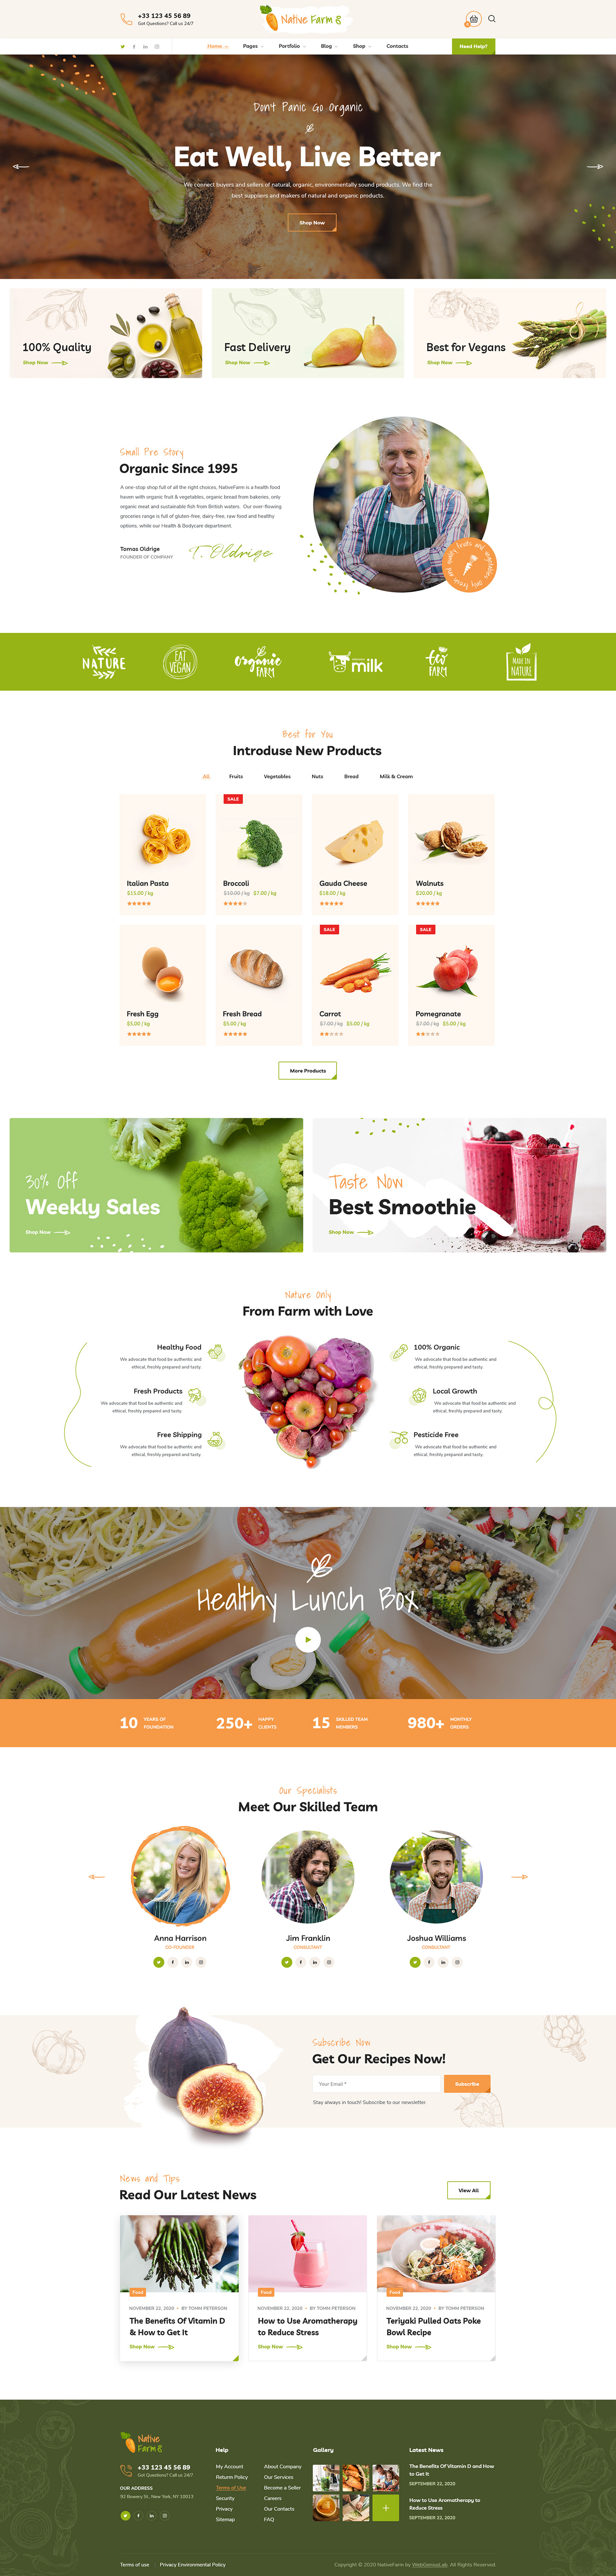 delivery farm Food  green Health Nature organic UI ux Webdesign